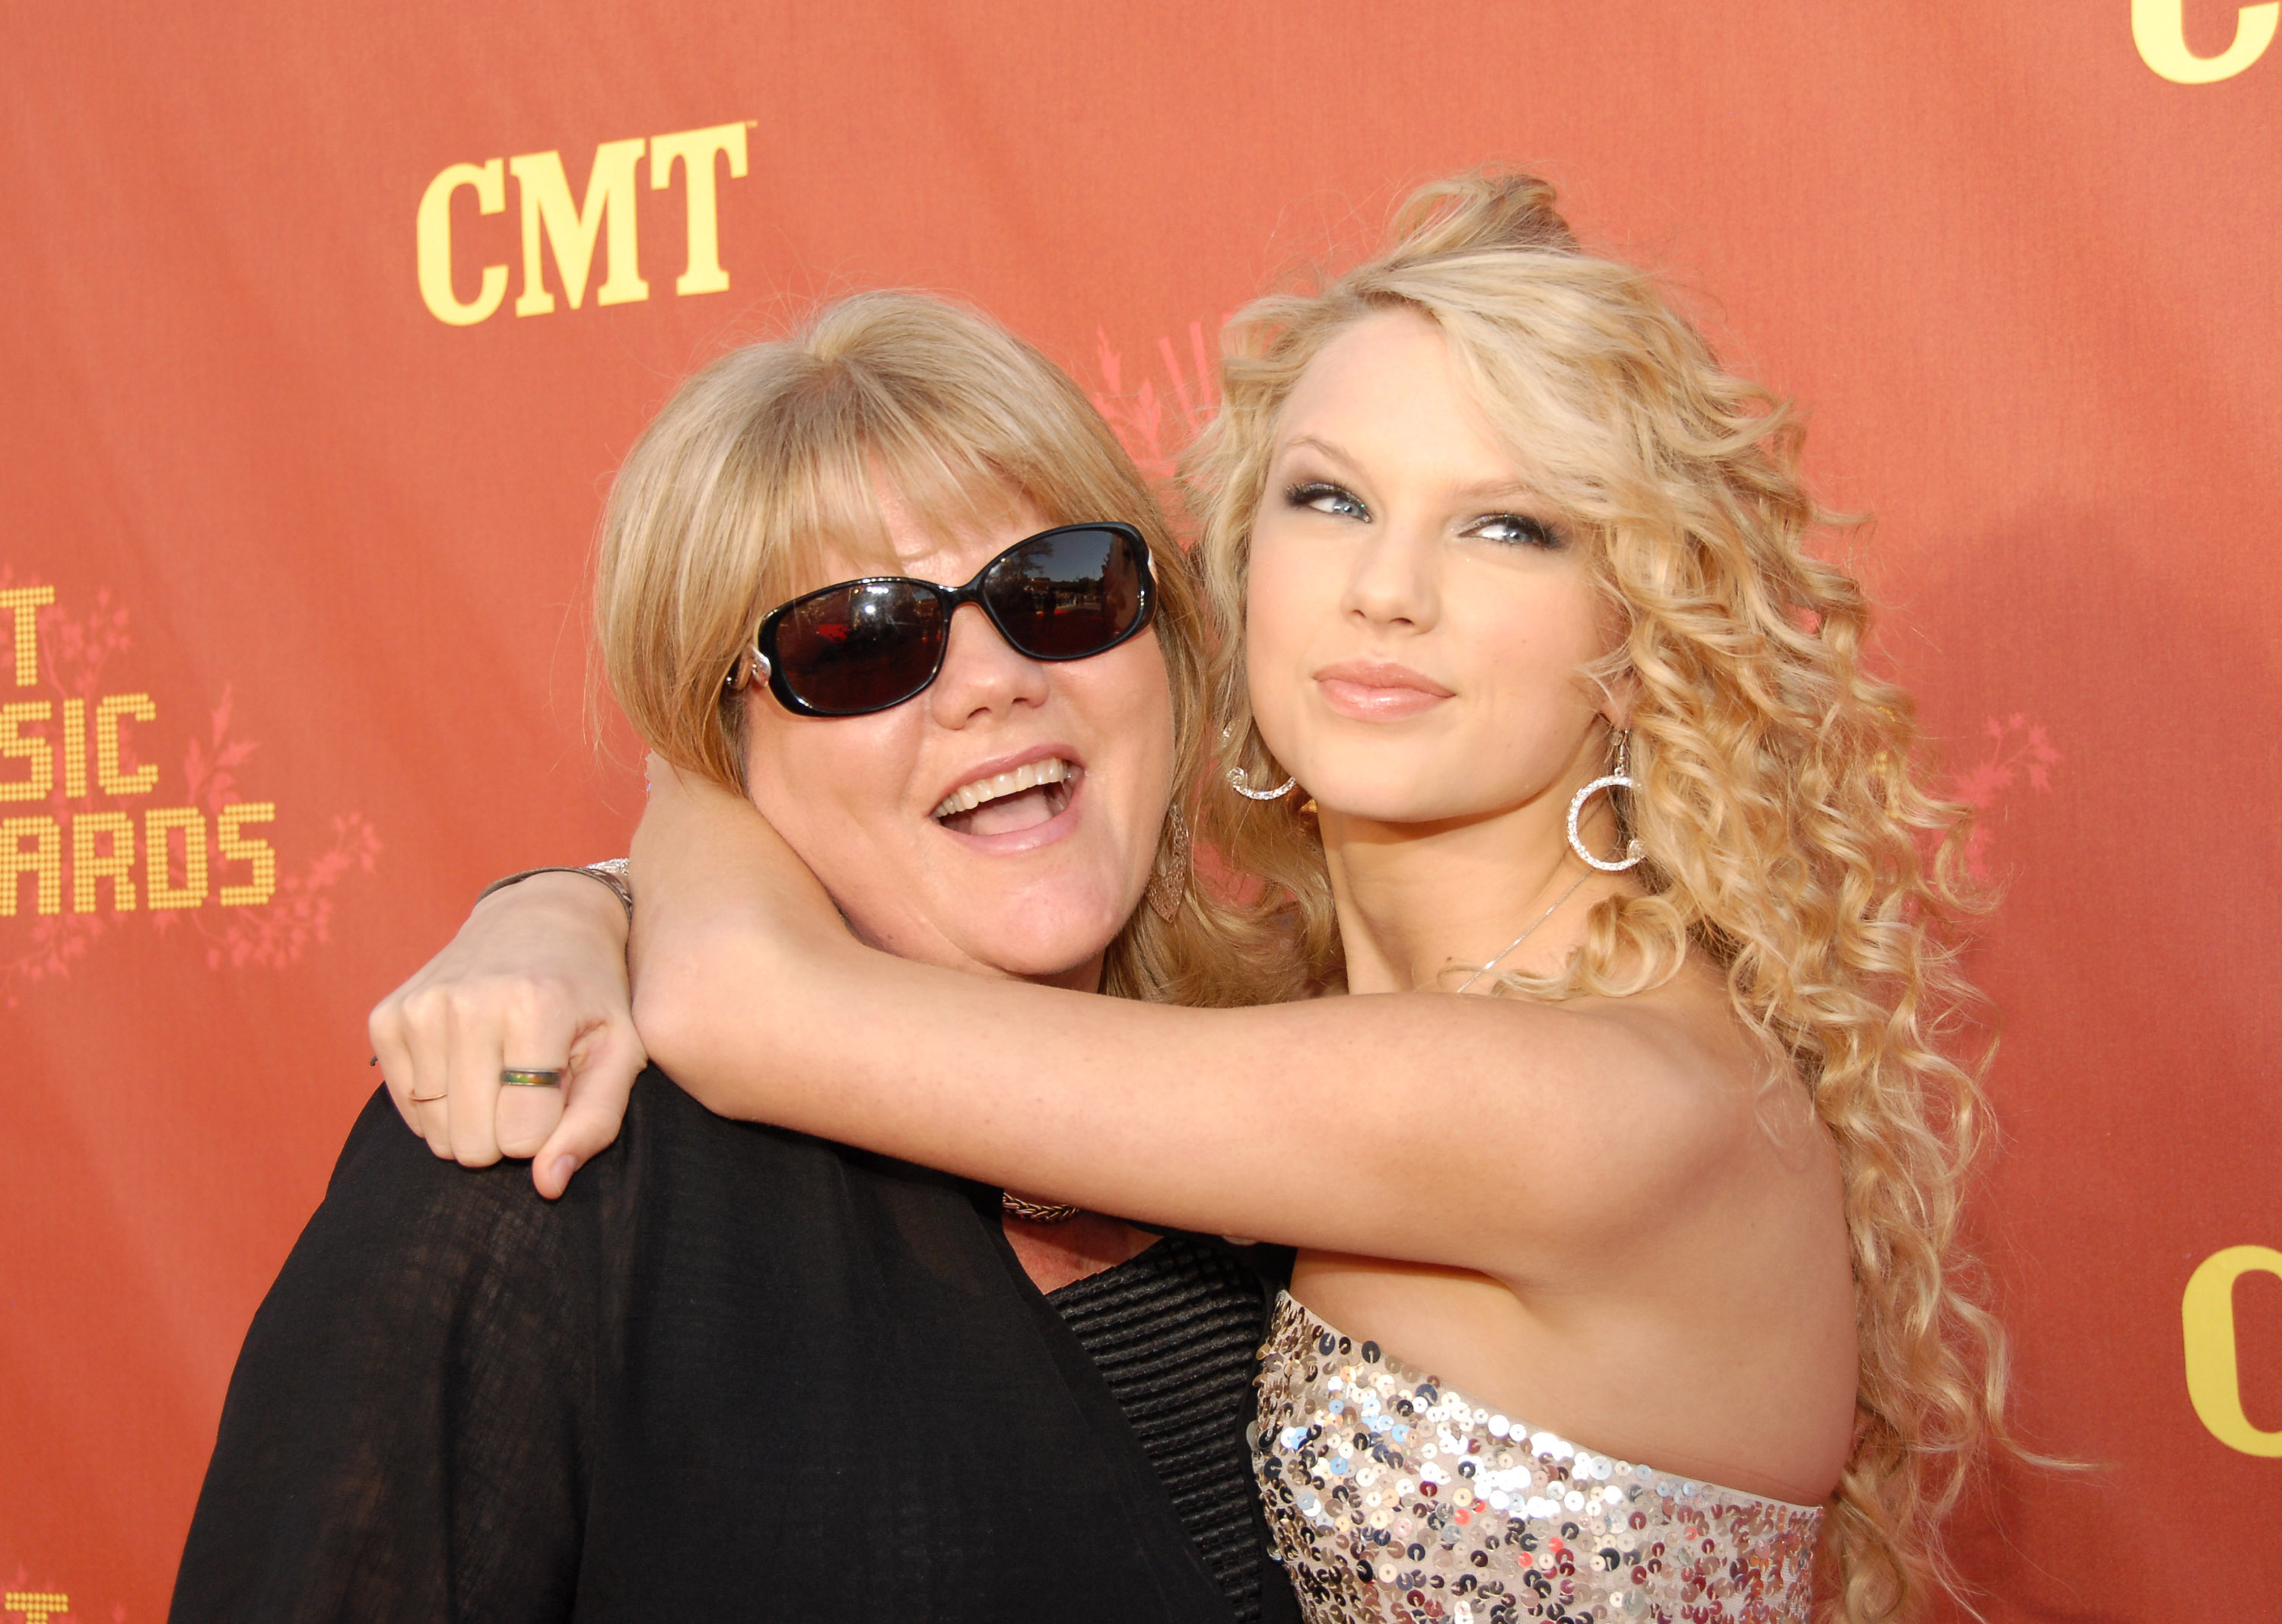 Andrea Swift and Taylor Swift at the CMT Music Awards - Red Carpet on April 16, 2007. | Source: Getty Images